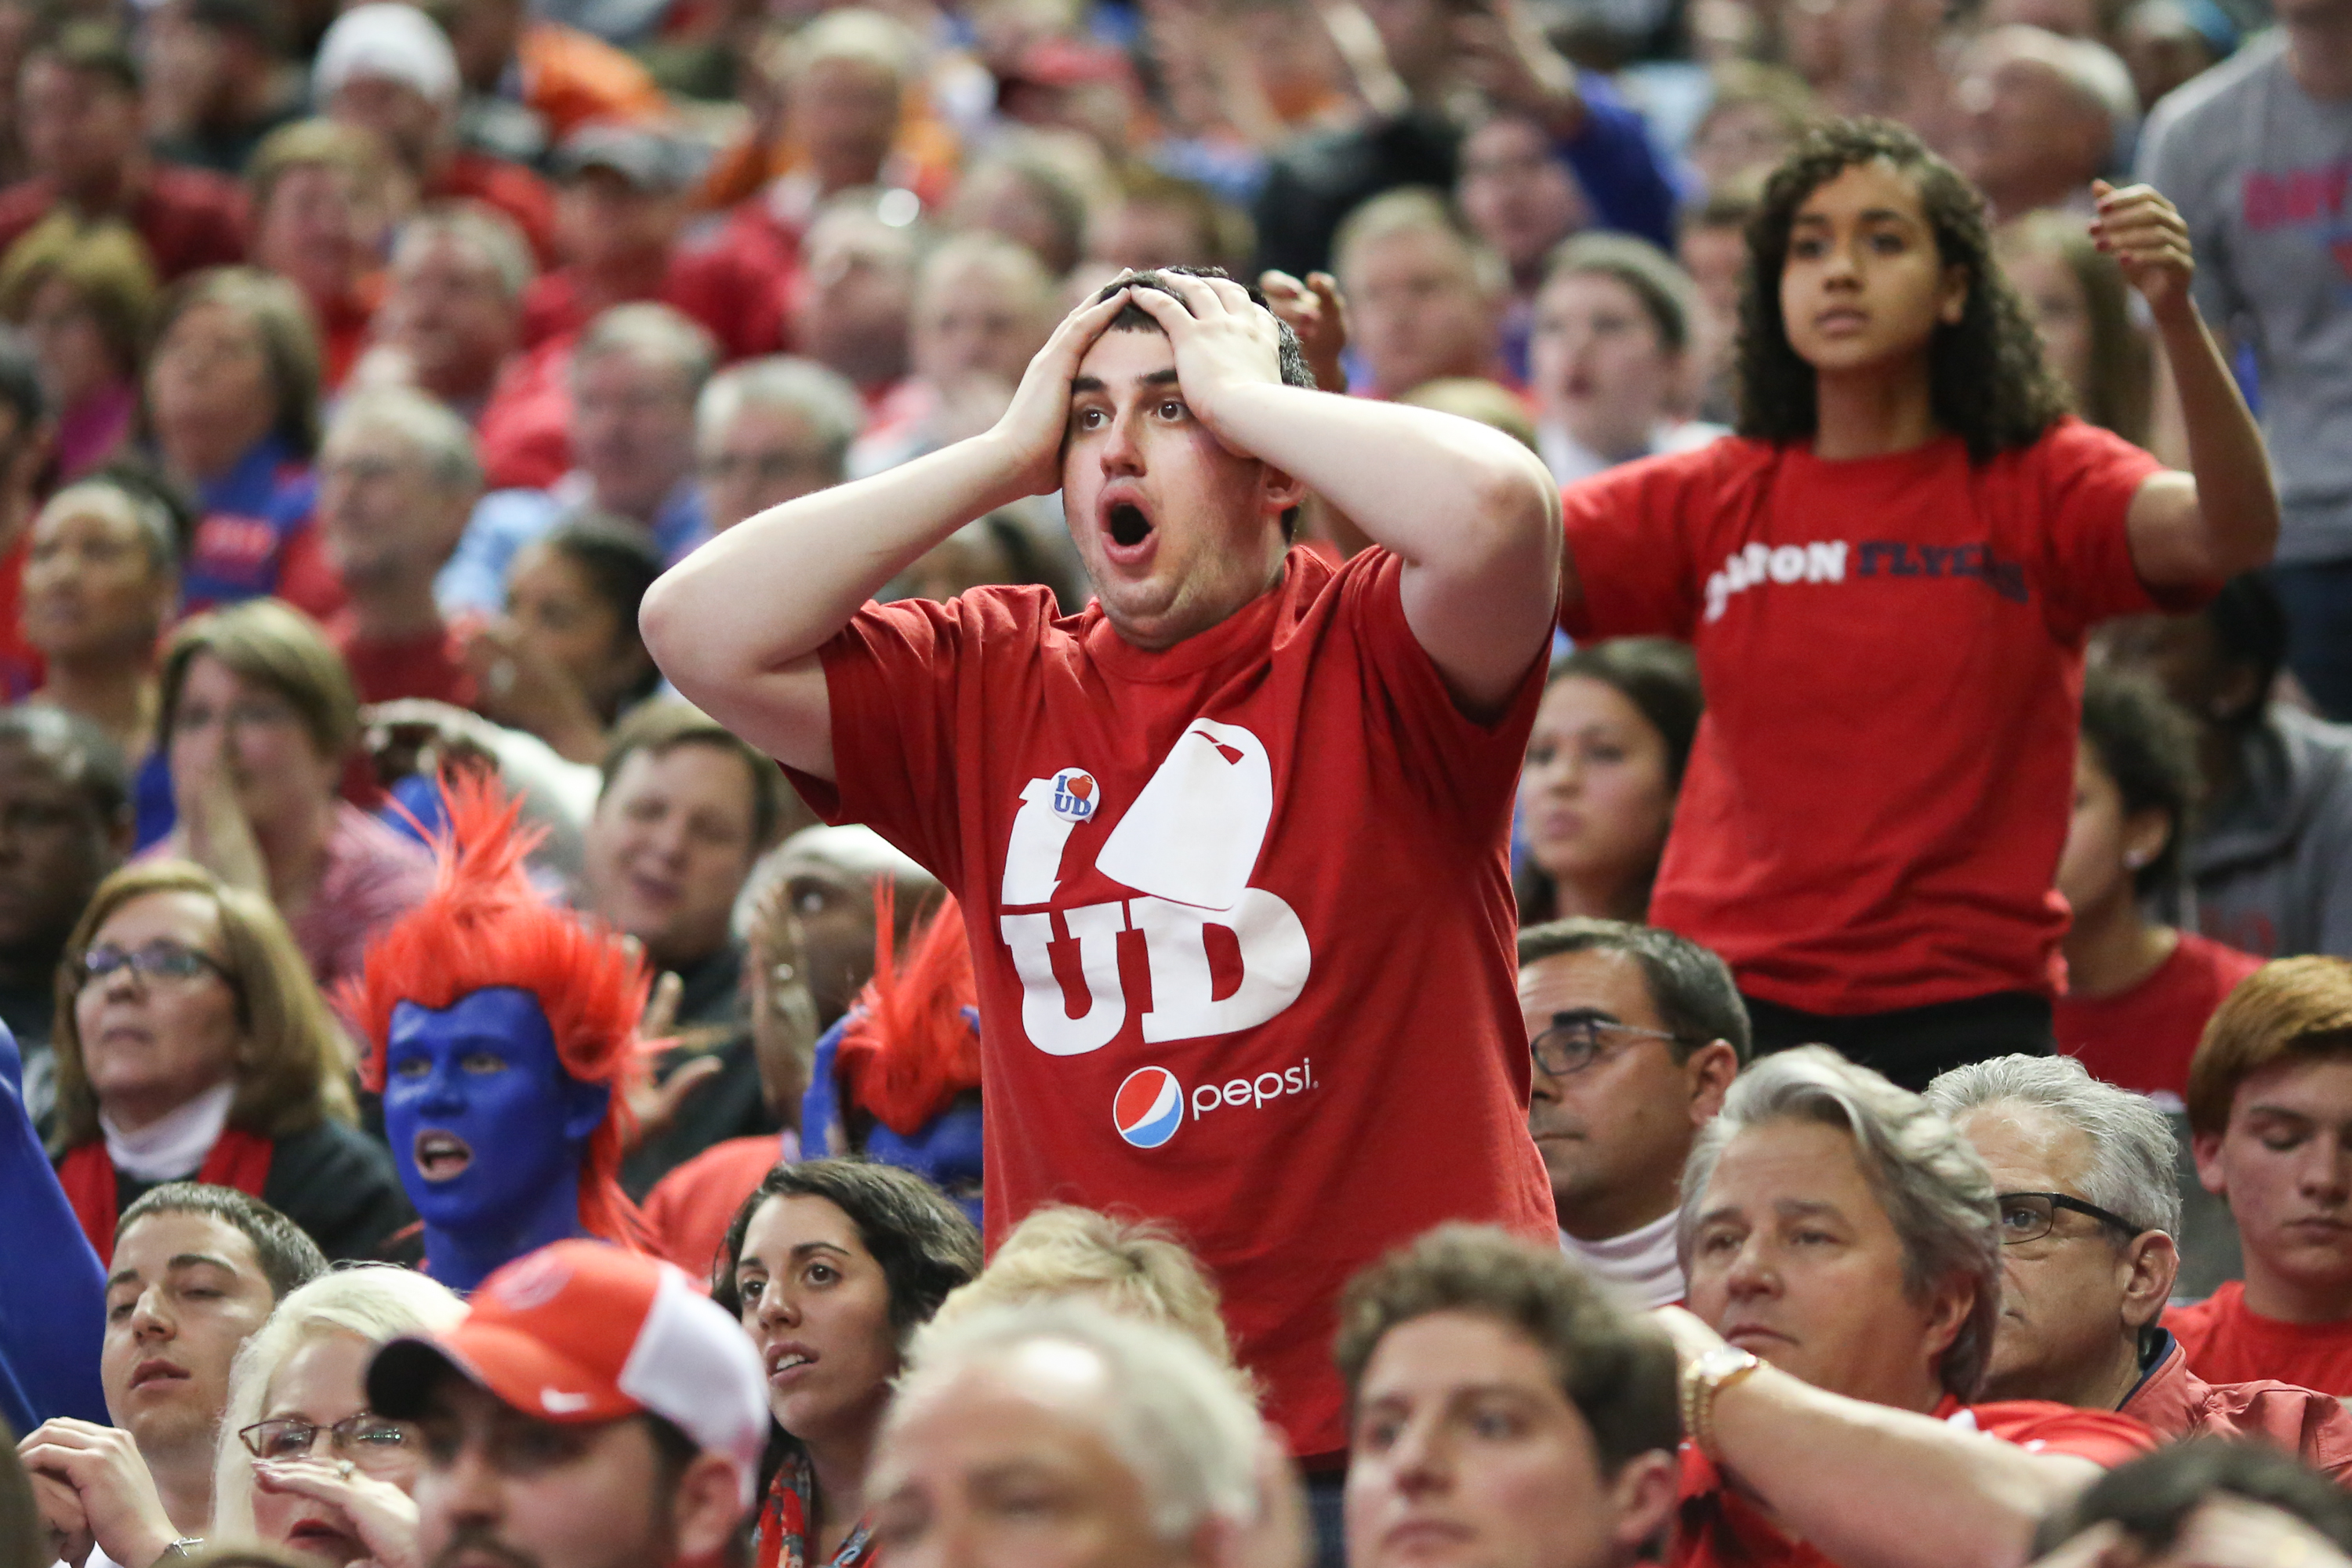  A fan of the Dayton Flyers reacts to a play during the third round of the 2014 NCAA Men's Basketball Championships against the Syracuse Orange at the First Niagara Center on Saturday, March 22, 2014 in Buffalo, N.Y. The lead changed four times in the last 10 minutes of regulation before the Flyers upset the Orange 55-53. Photo By Josh Barber